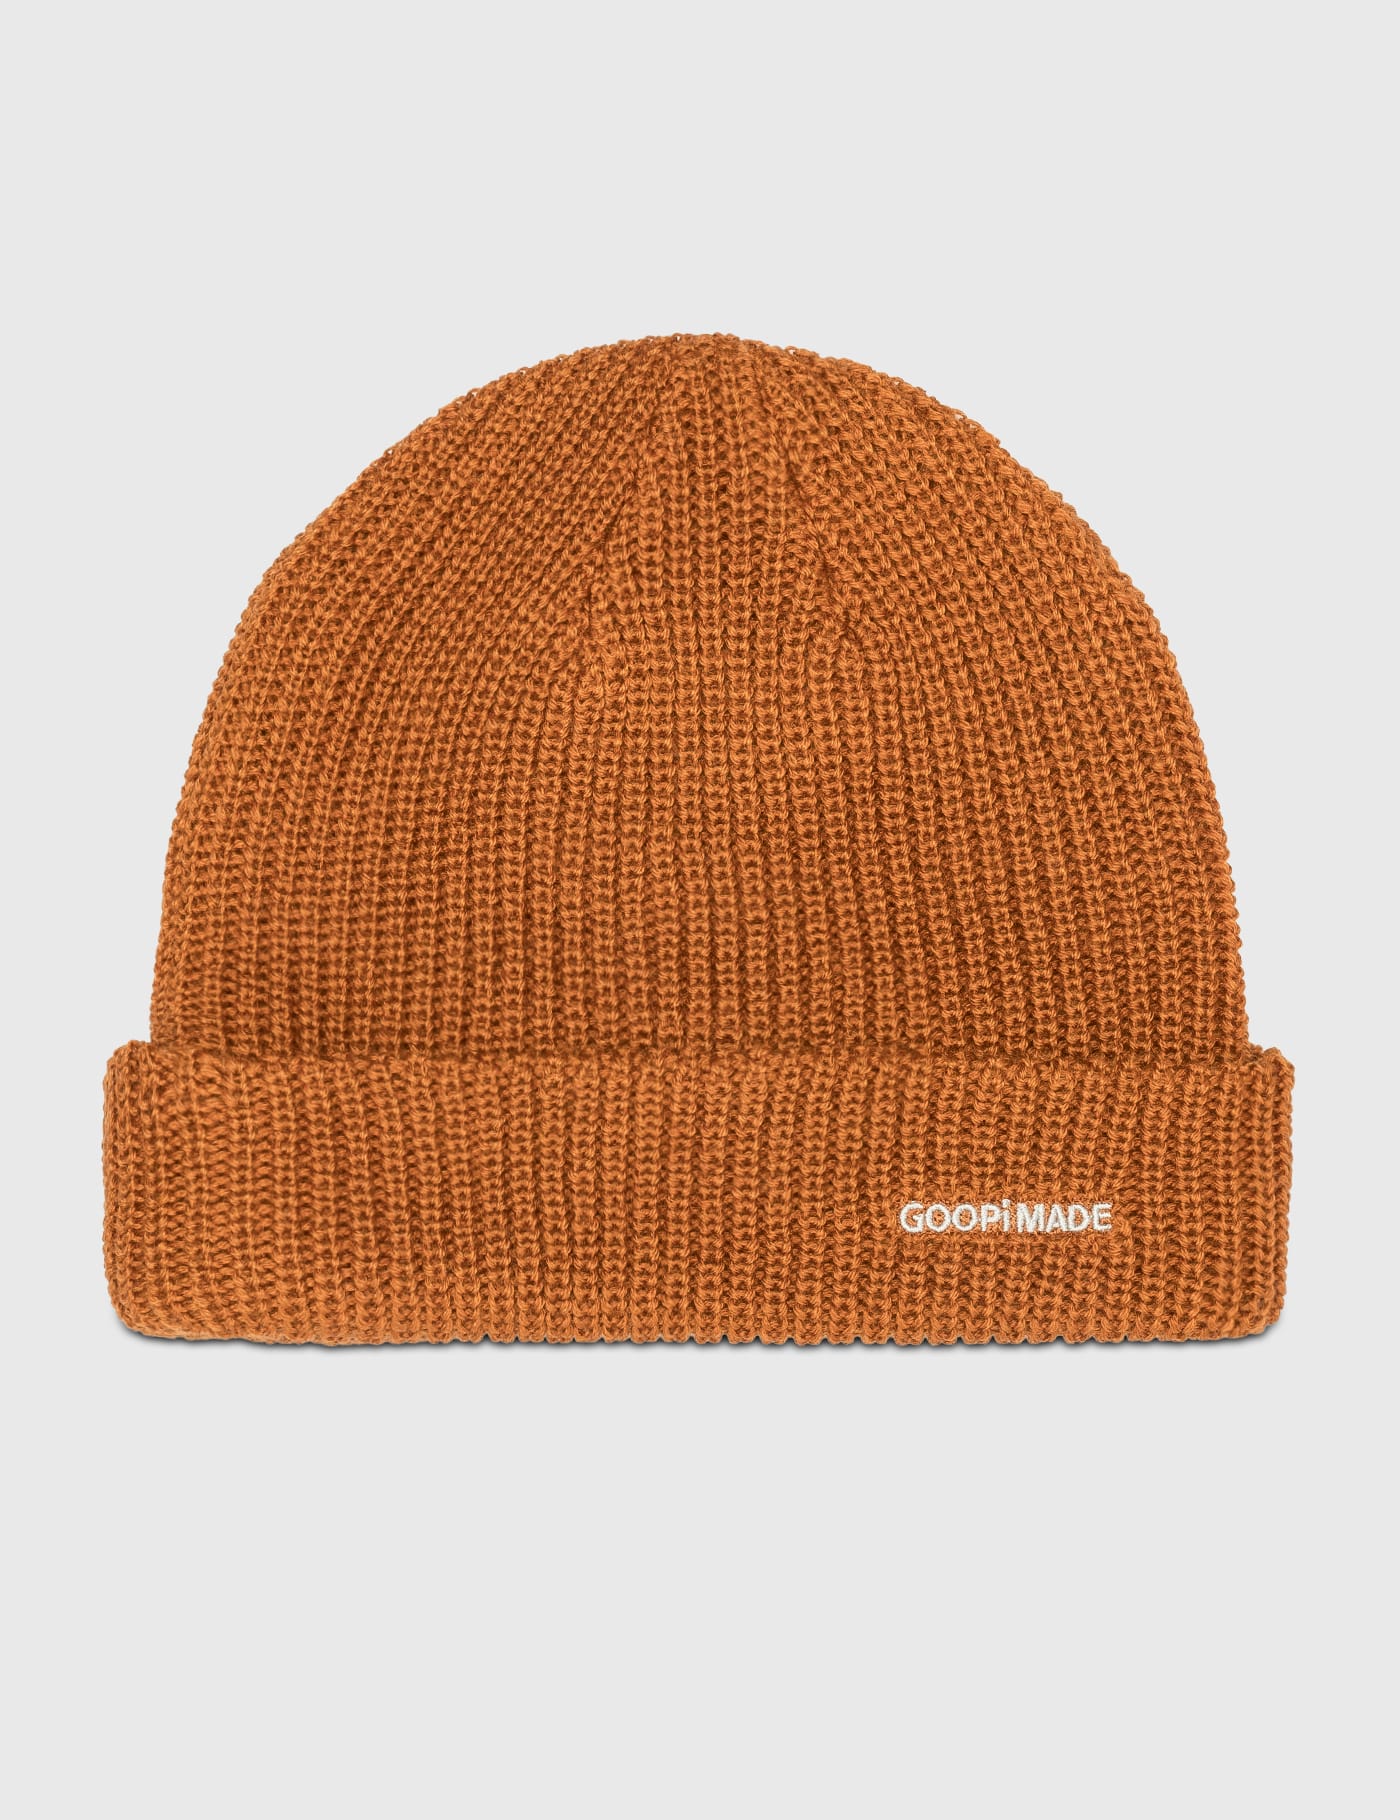 LMC - Arch Og Uncuffed Beanie | HBX - Globally Curated Fashion and 